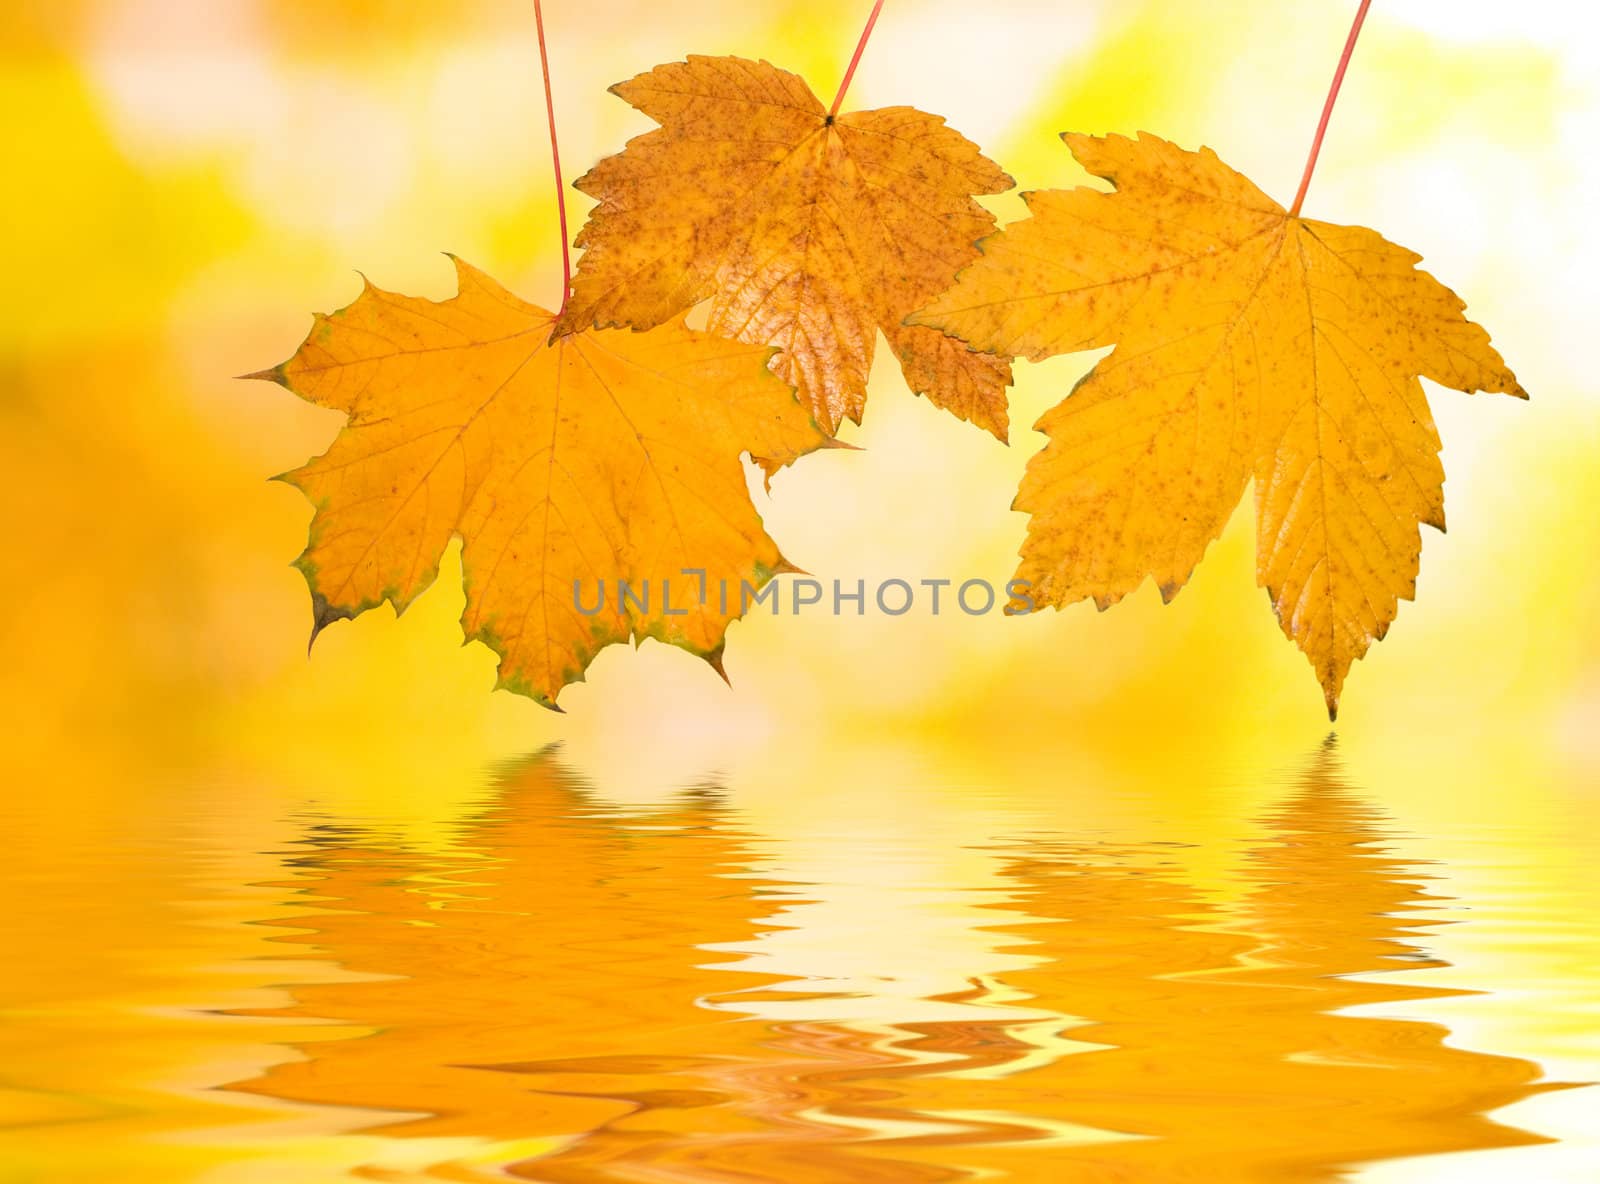 Beautiful golden leaves in autumn with reflection